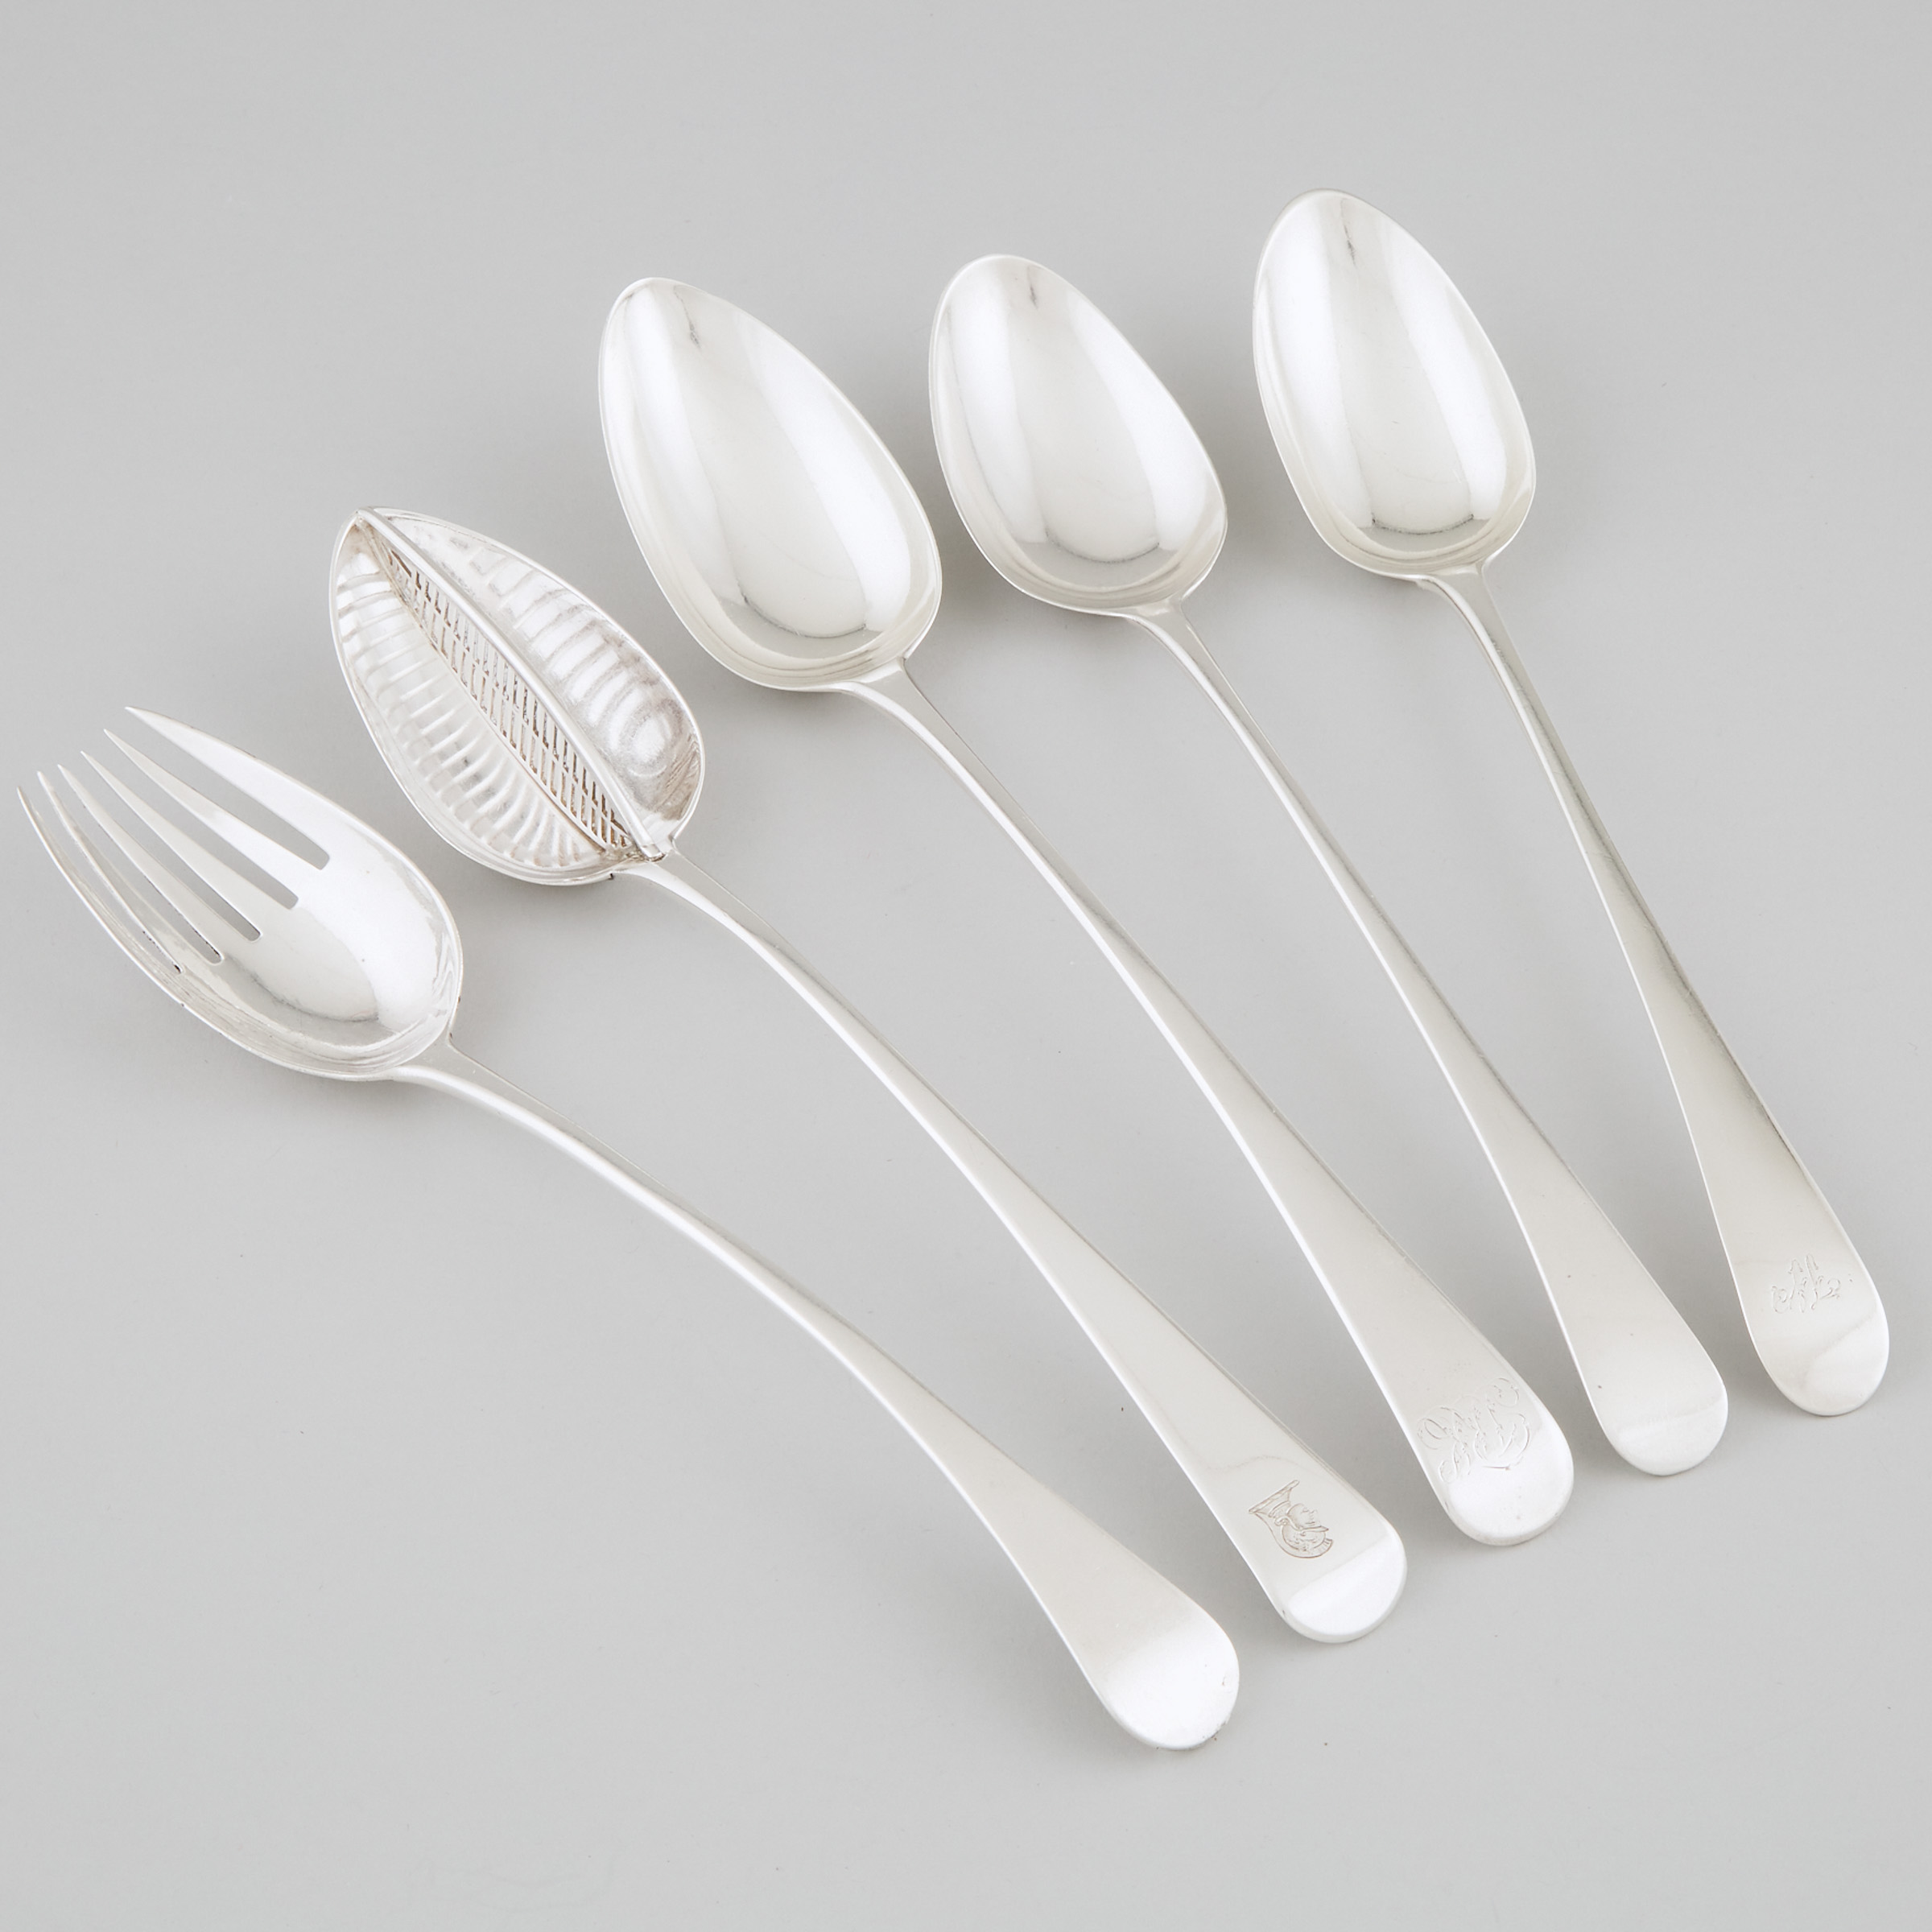 Five George III Silver Old English Pattern Serving Spoons, London, c.1787-1807